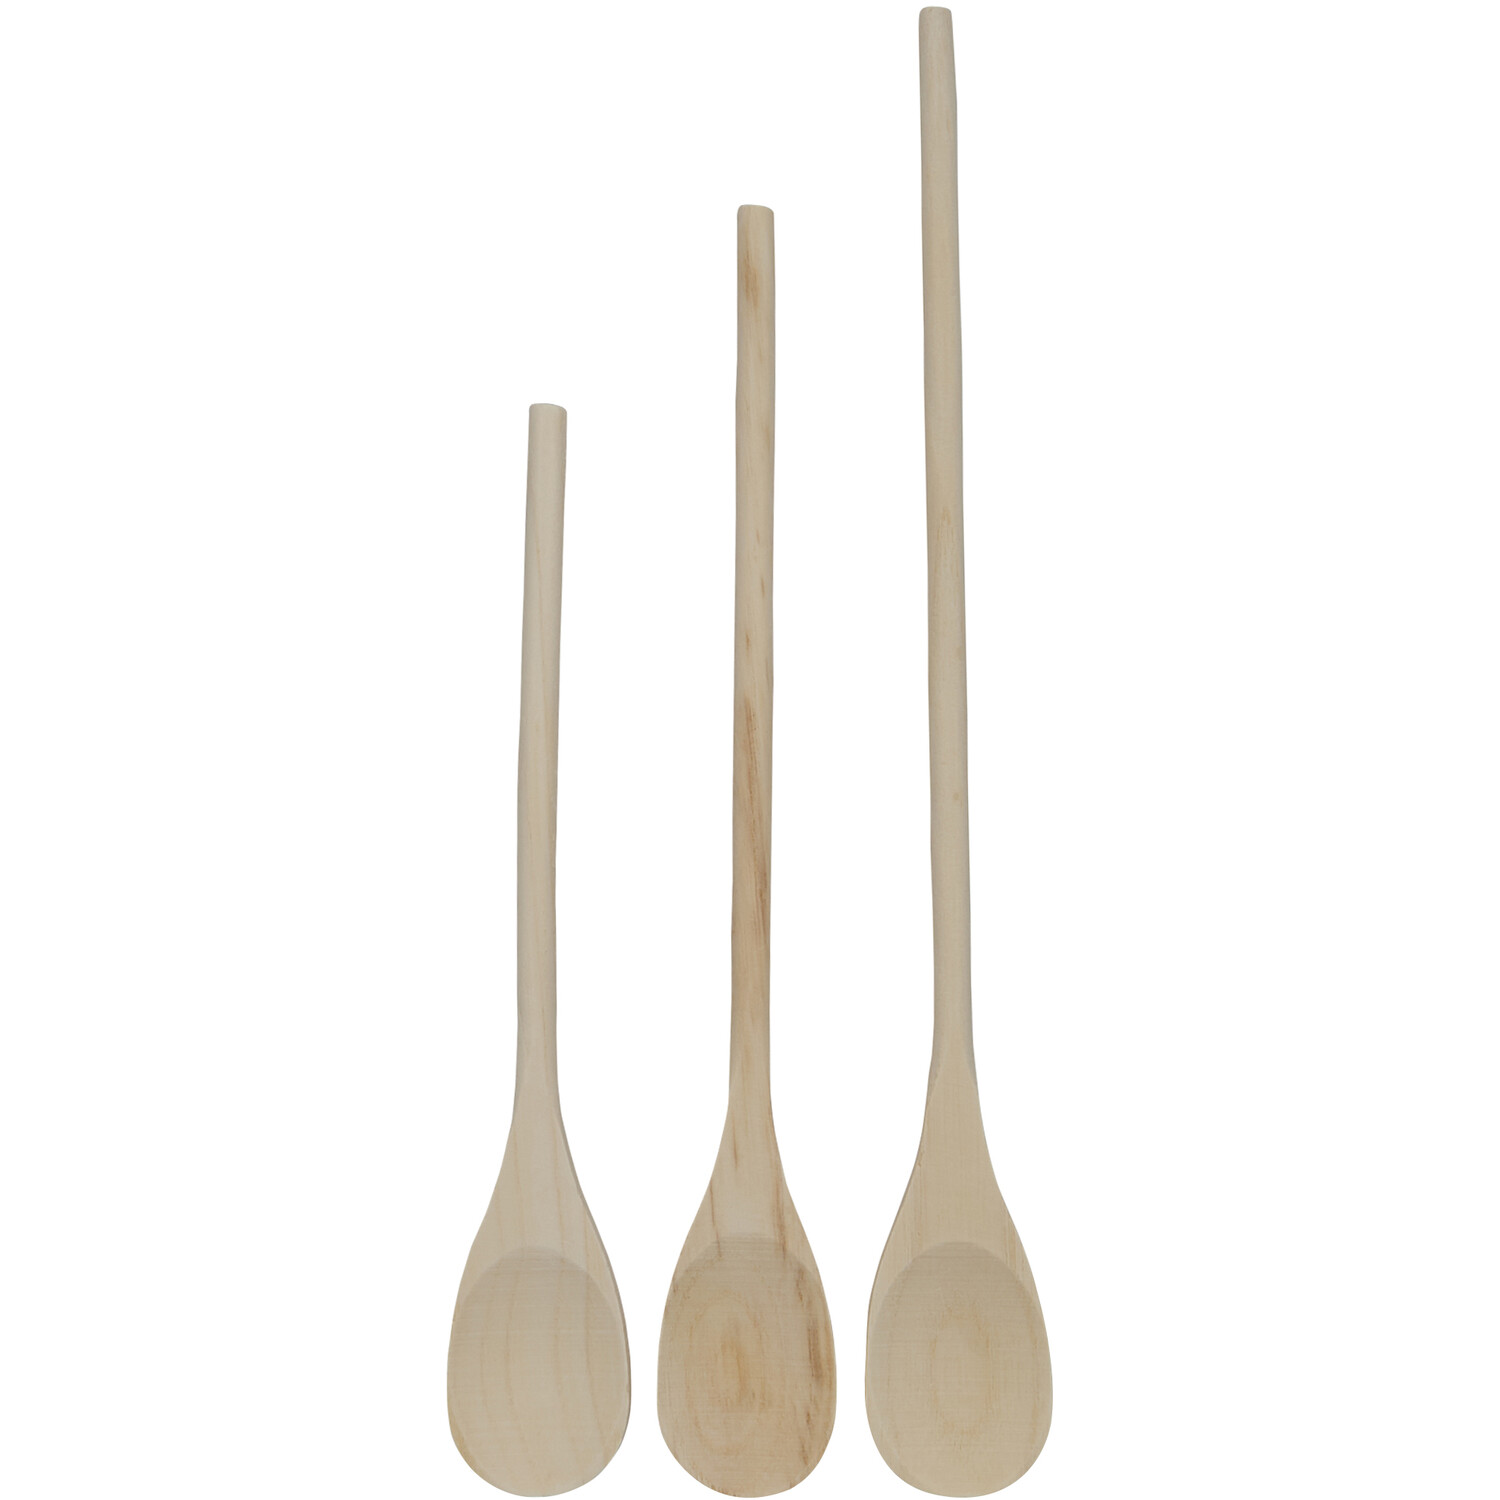 Pack of 3 Wooden Spoons - Natural Image 2